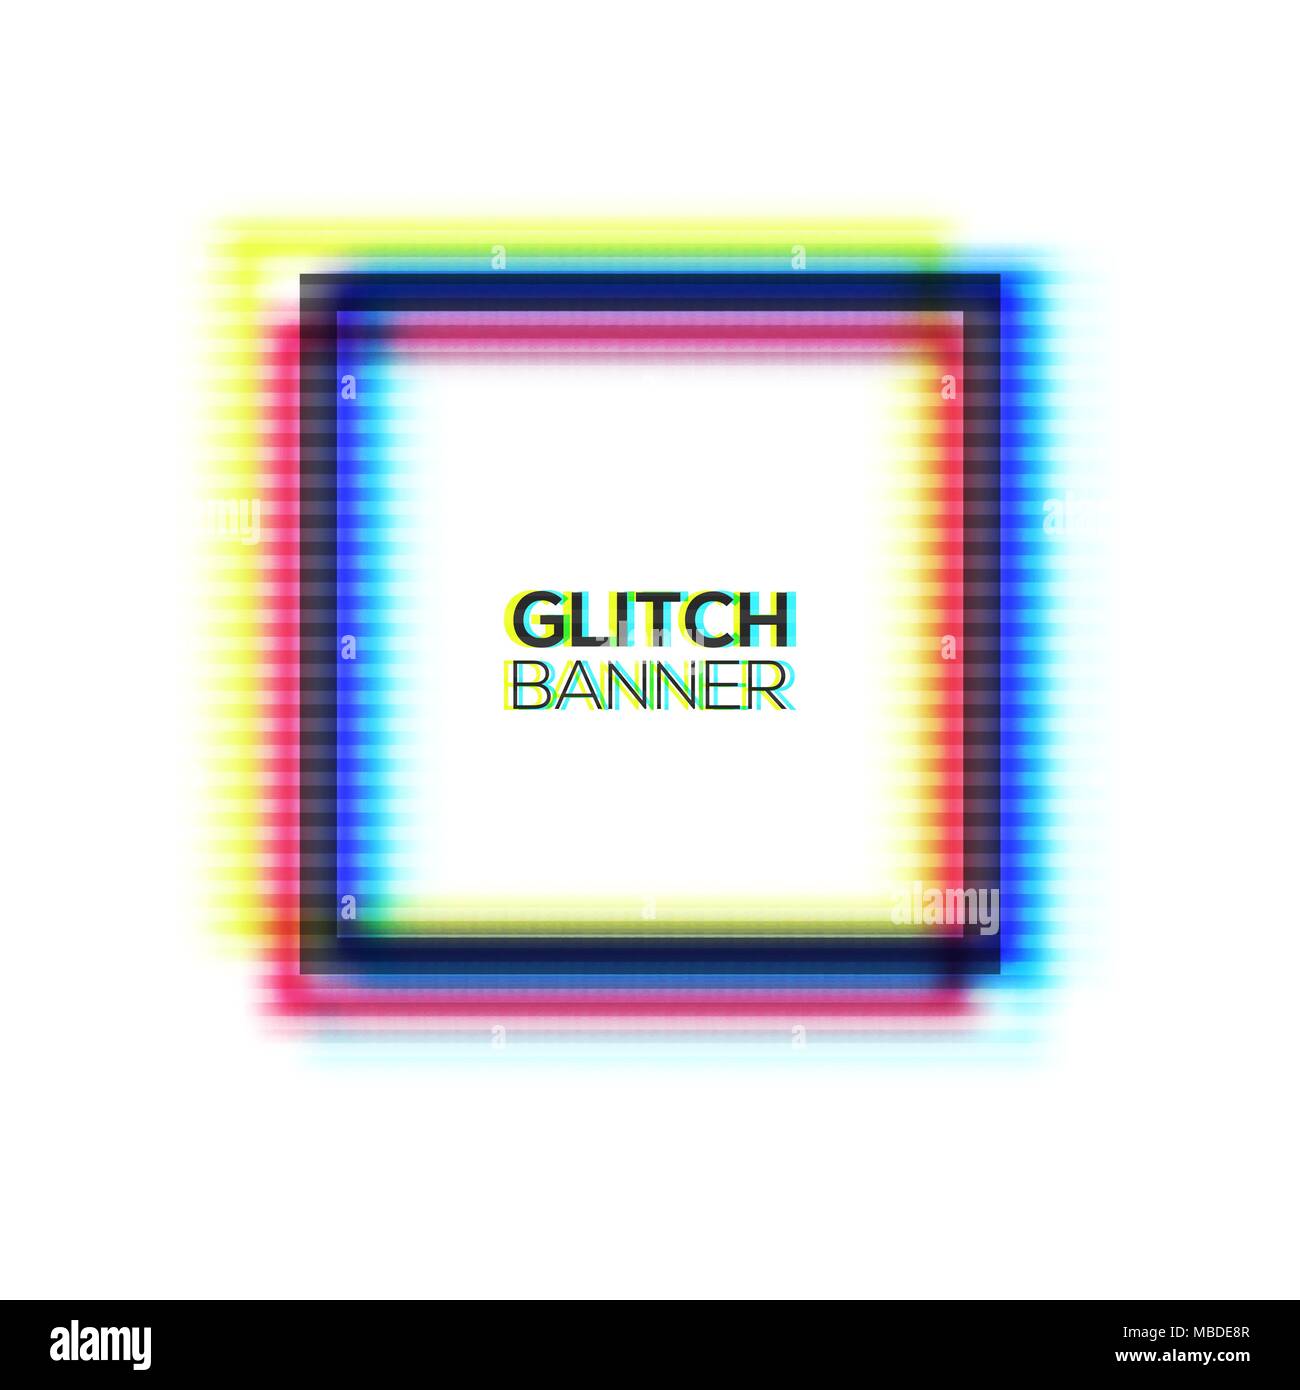 Abstract glitch texture square frame. Geometric style art. Distorted modern rectangle background with glitch effect. Broken glitched sign concept of rgb cmyk colors channel. Color vector illustration. Stock Vector